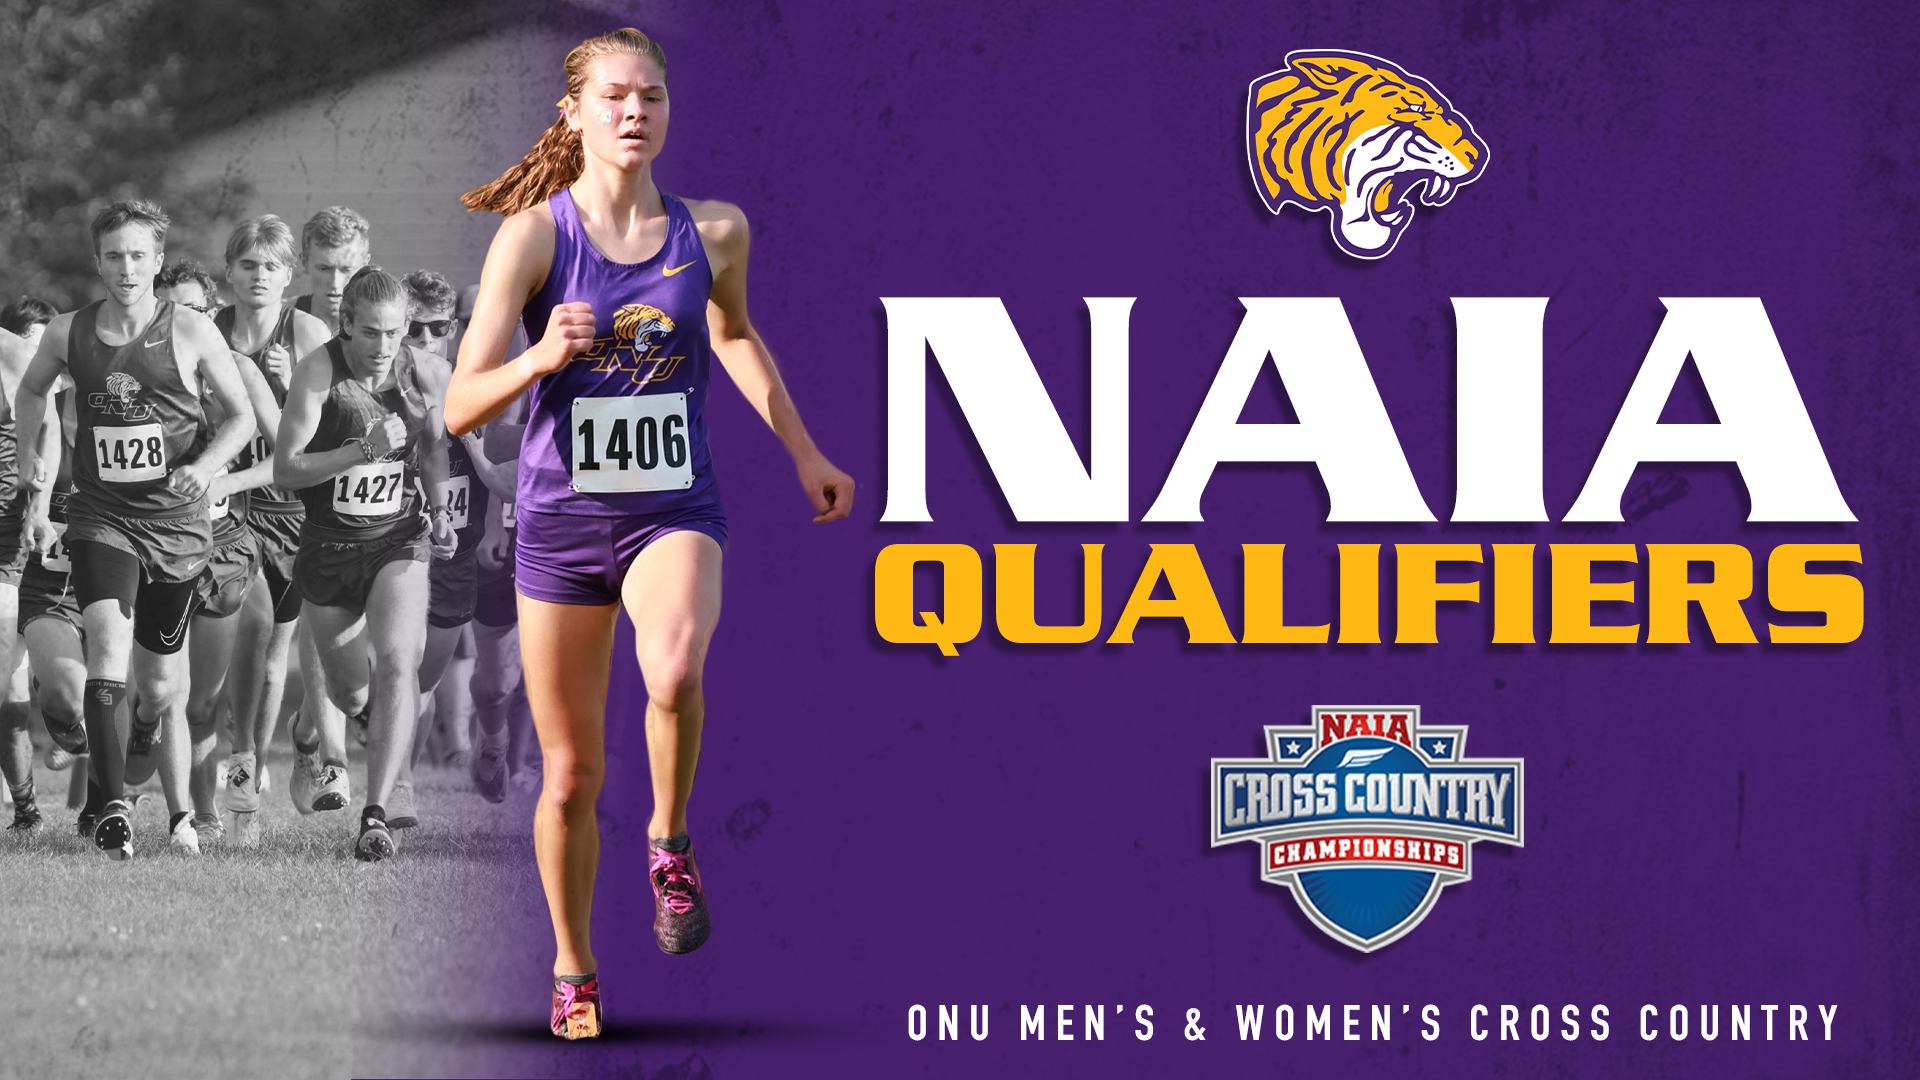 ONU MEN’S AND WOMEN’S CROSS COUNTRY TEAMS QUALIFY FOR NAIA CHAMPIONSHIPS